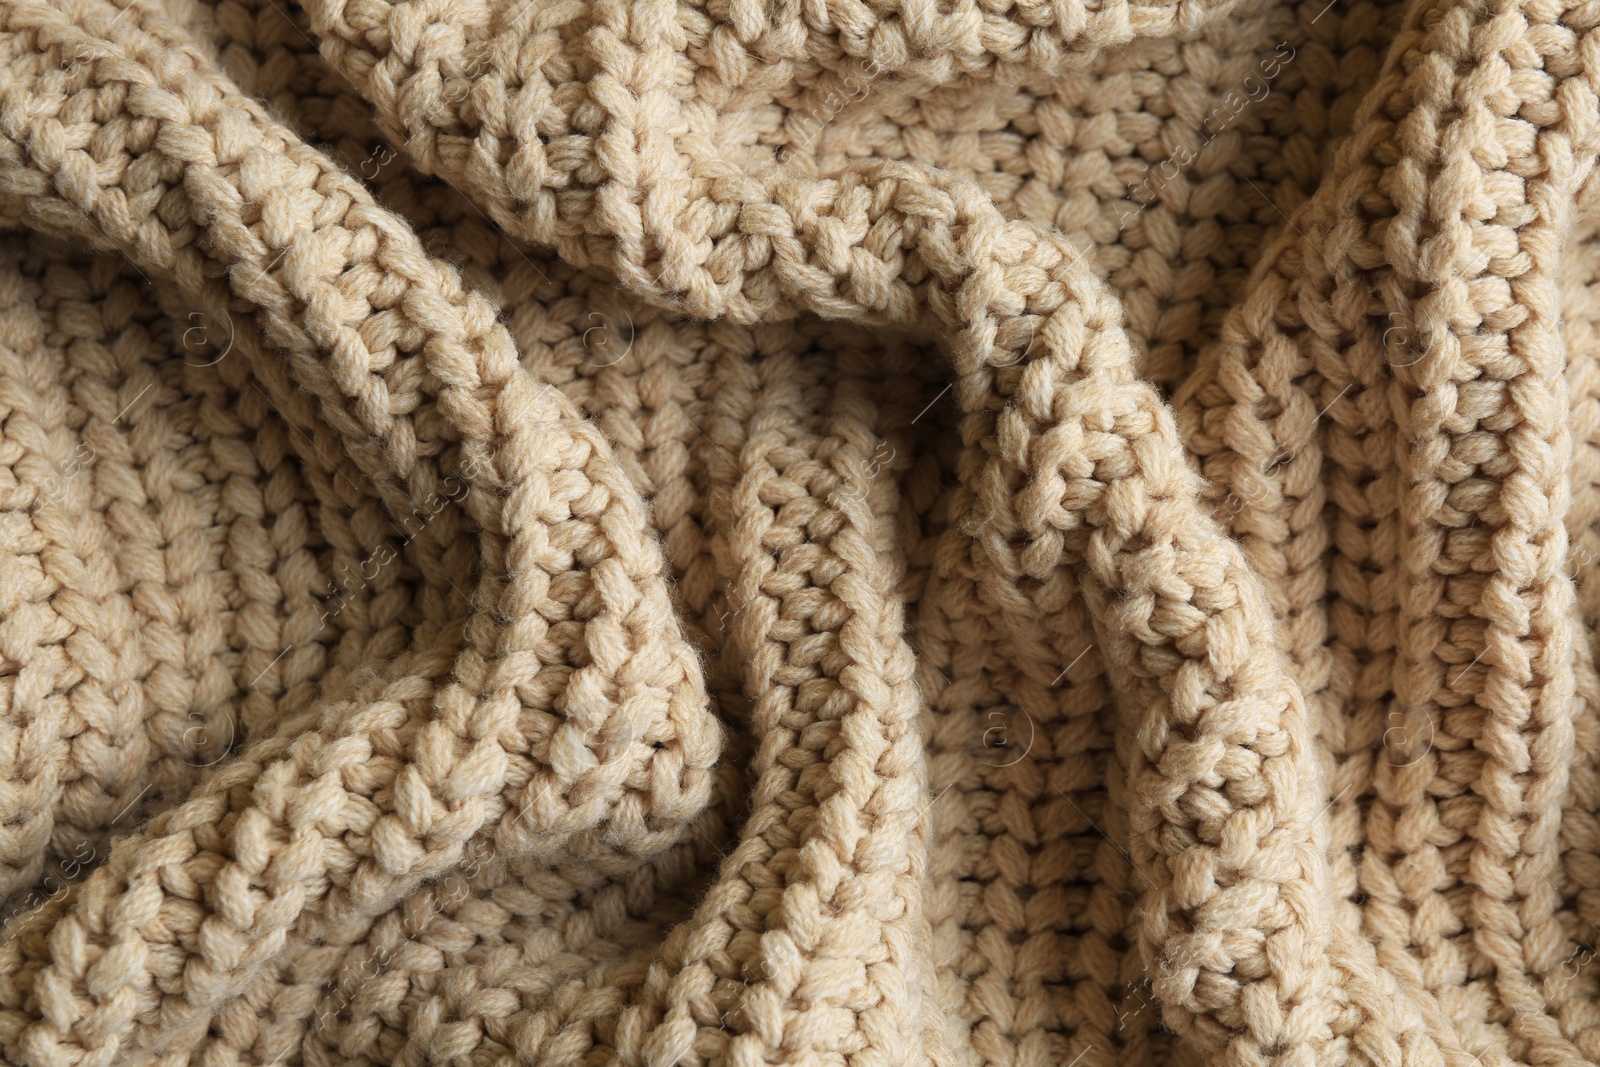 Photo of Beautiful beige knitted fabric as background, top view